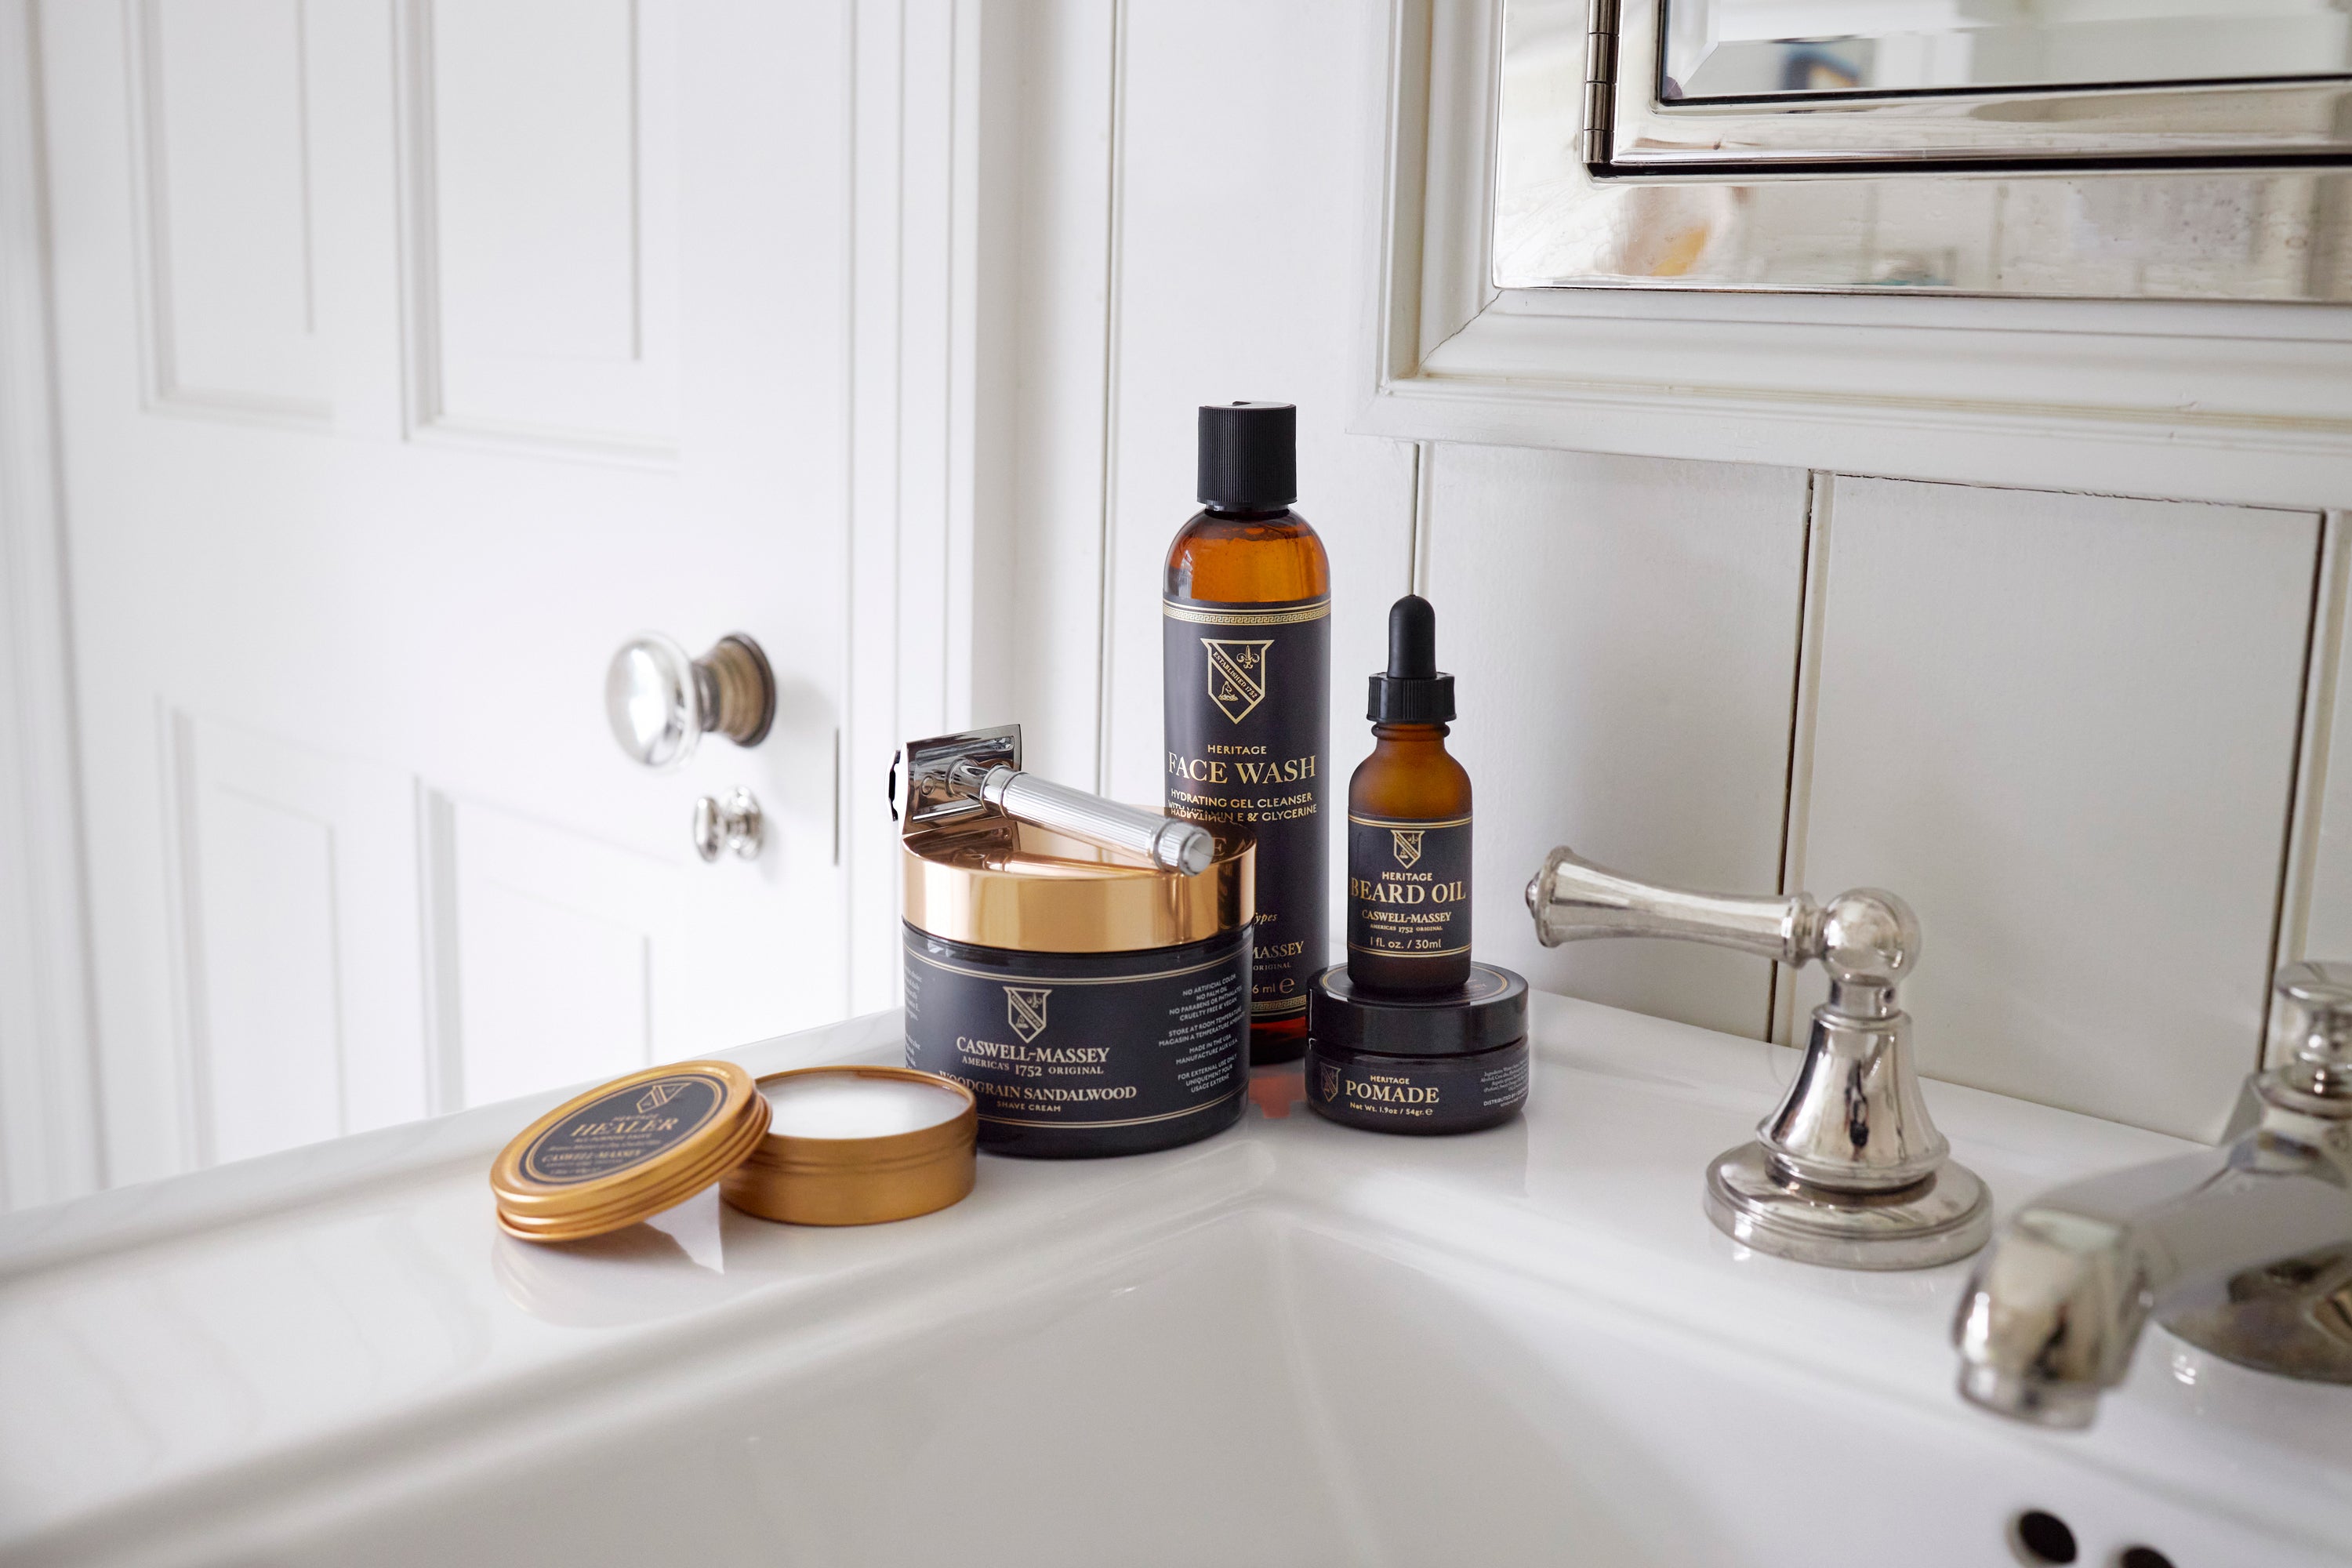 Caswell-Massey's Men's Heritage Collection: shave cream, pomade, beard oil, and hand salve shown on bathroom sink